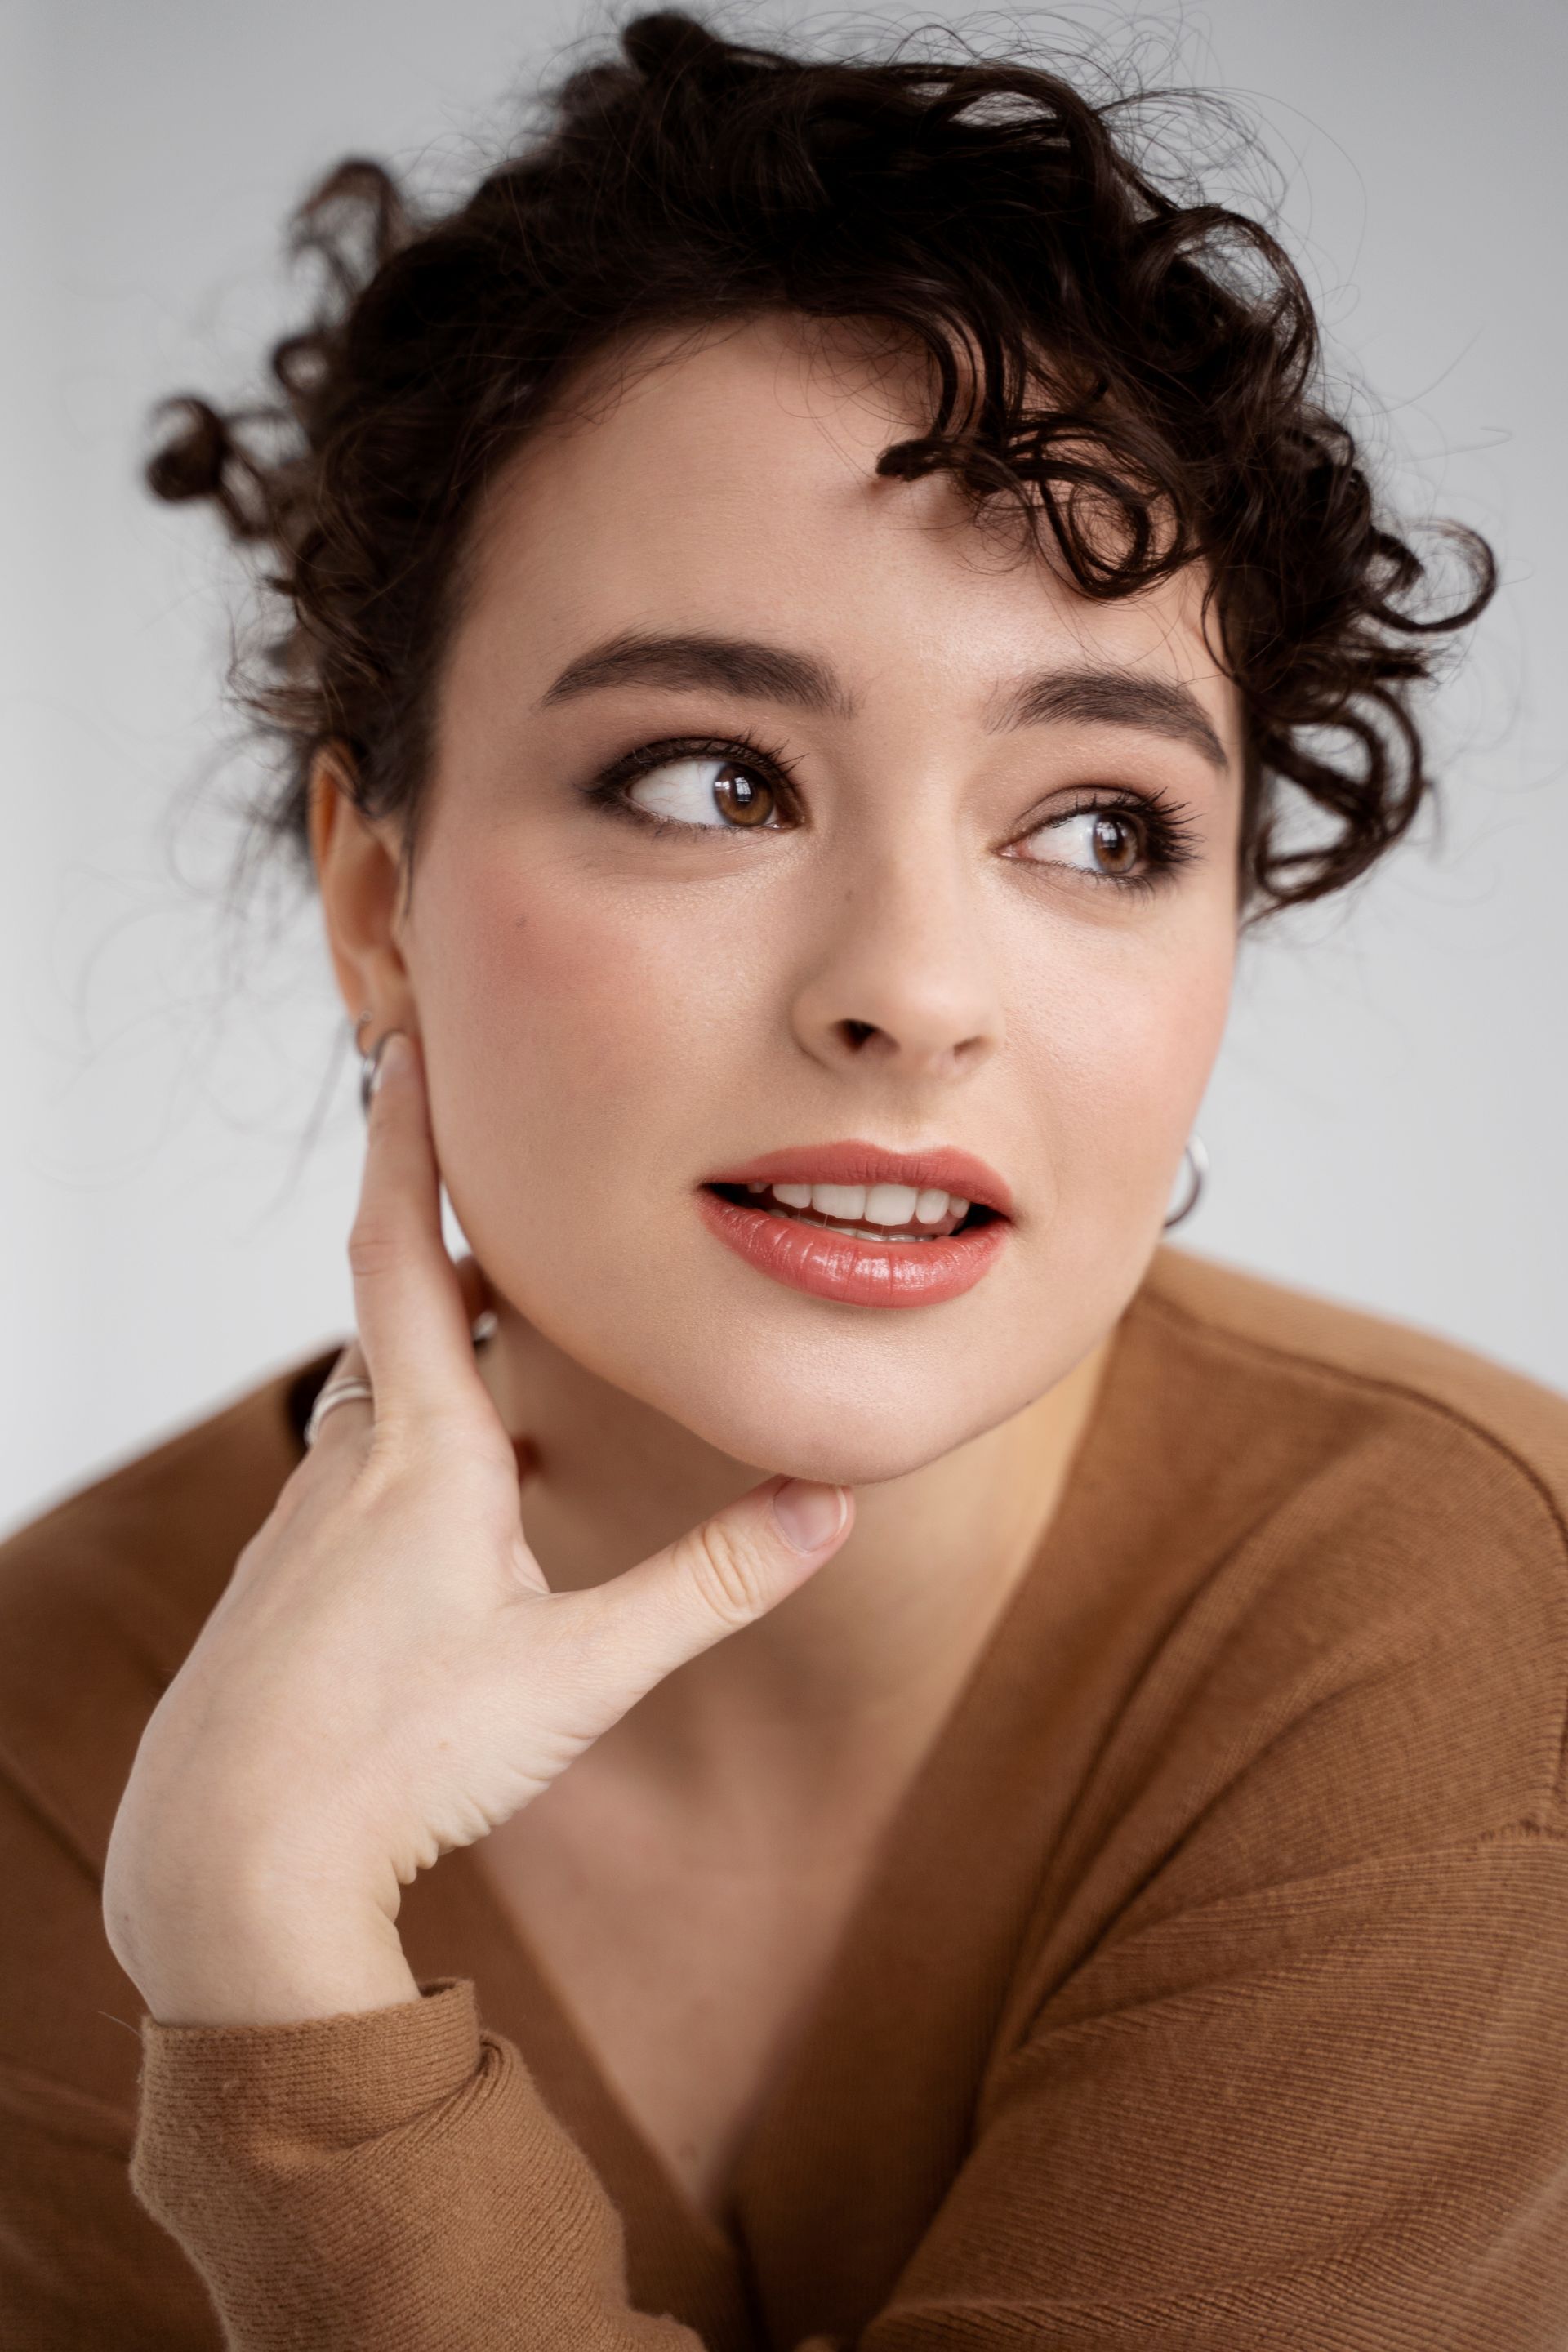 A woman with curly hair is wearing a brown sweater and earrings.